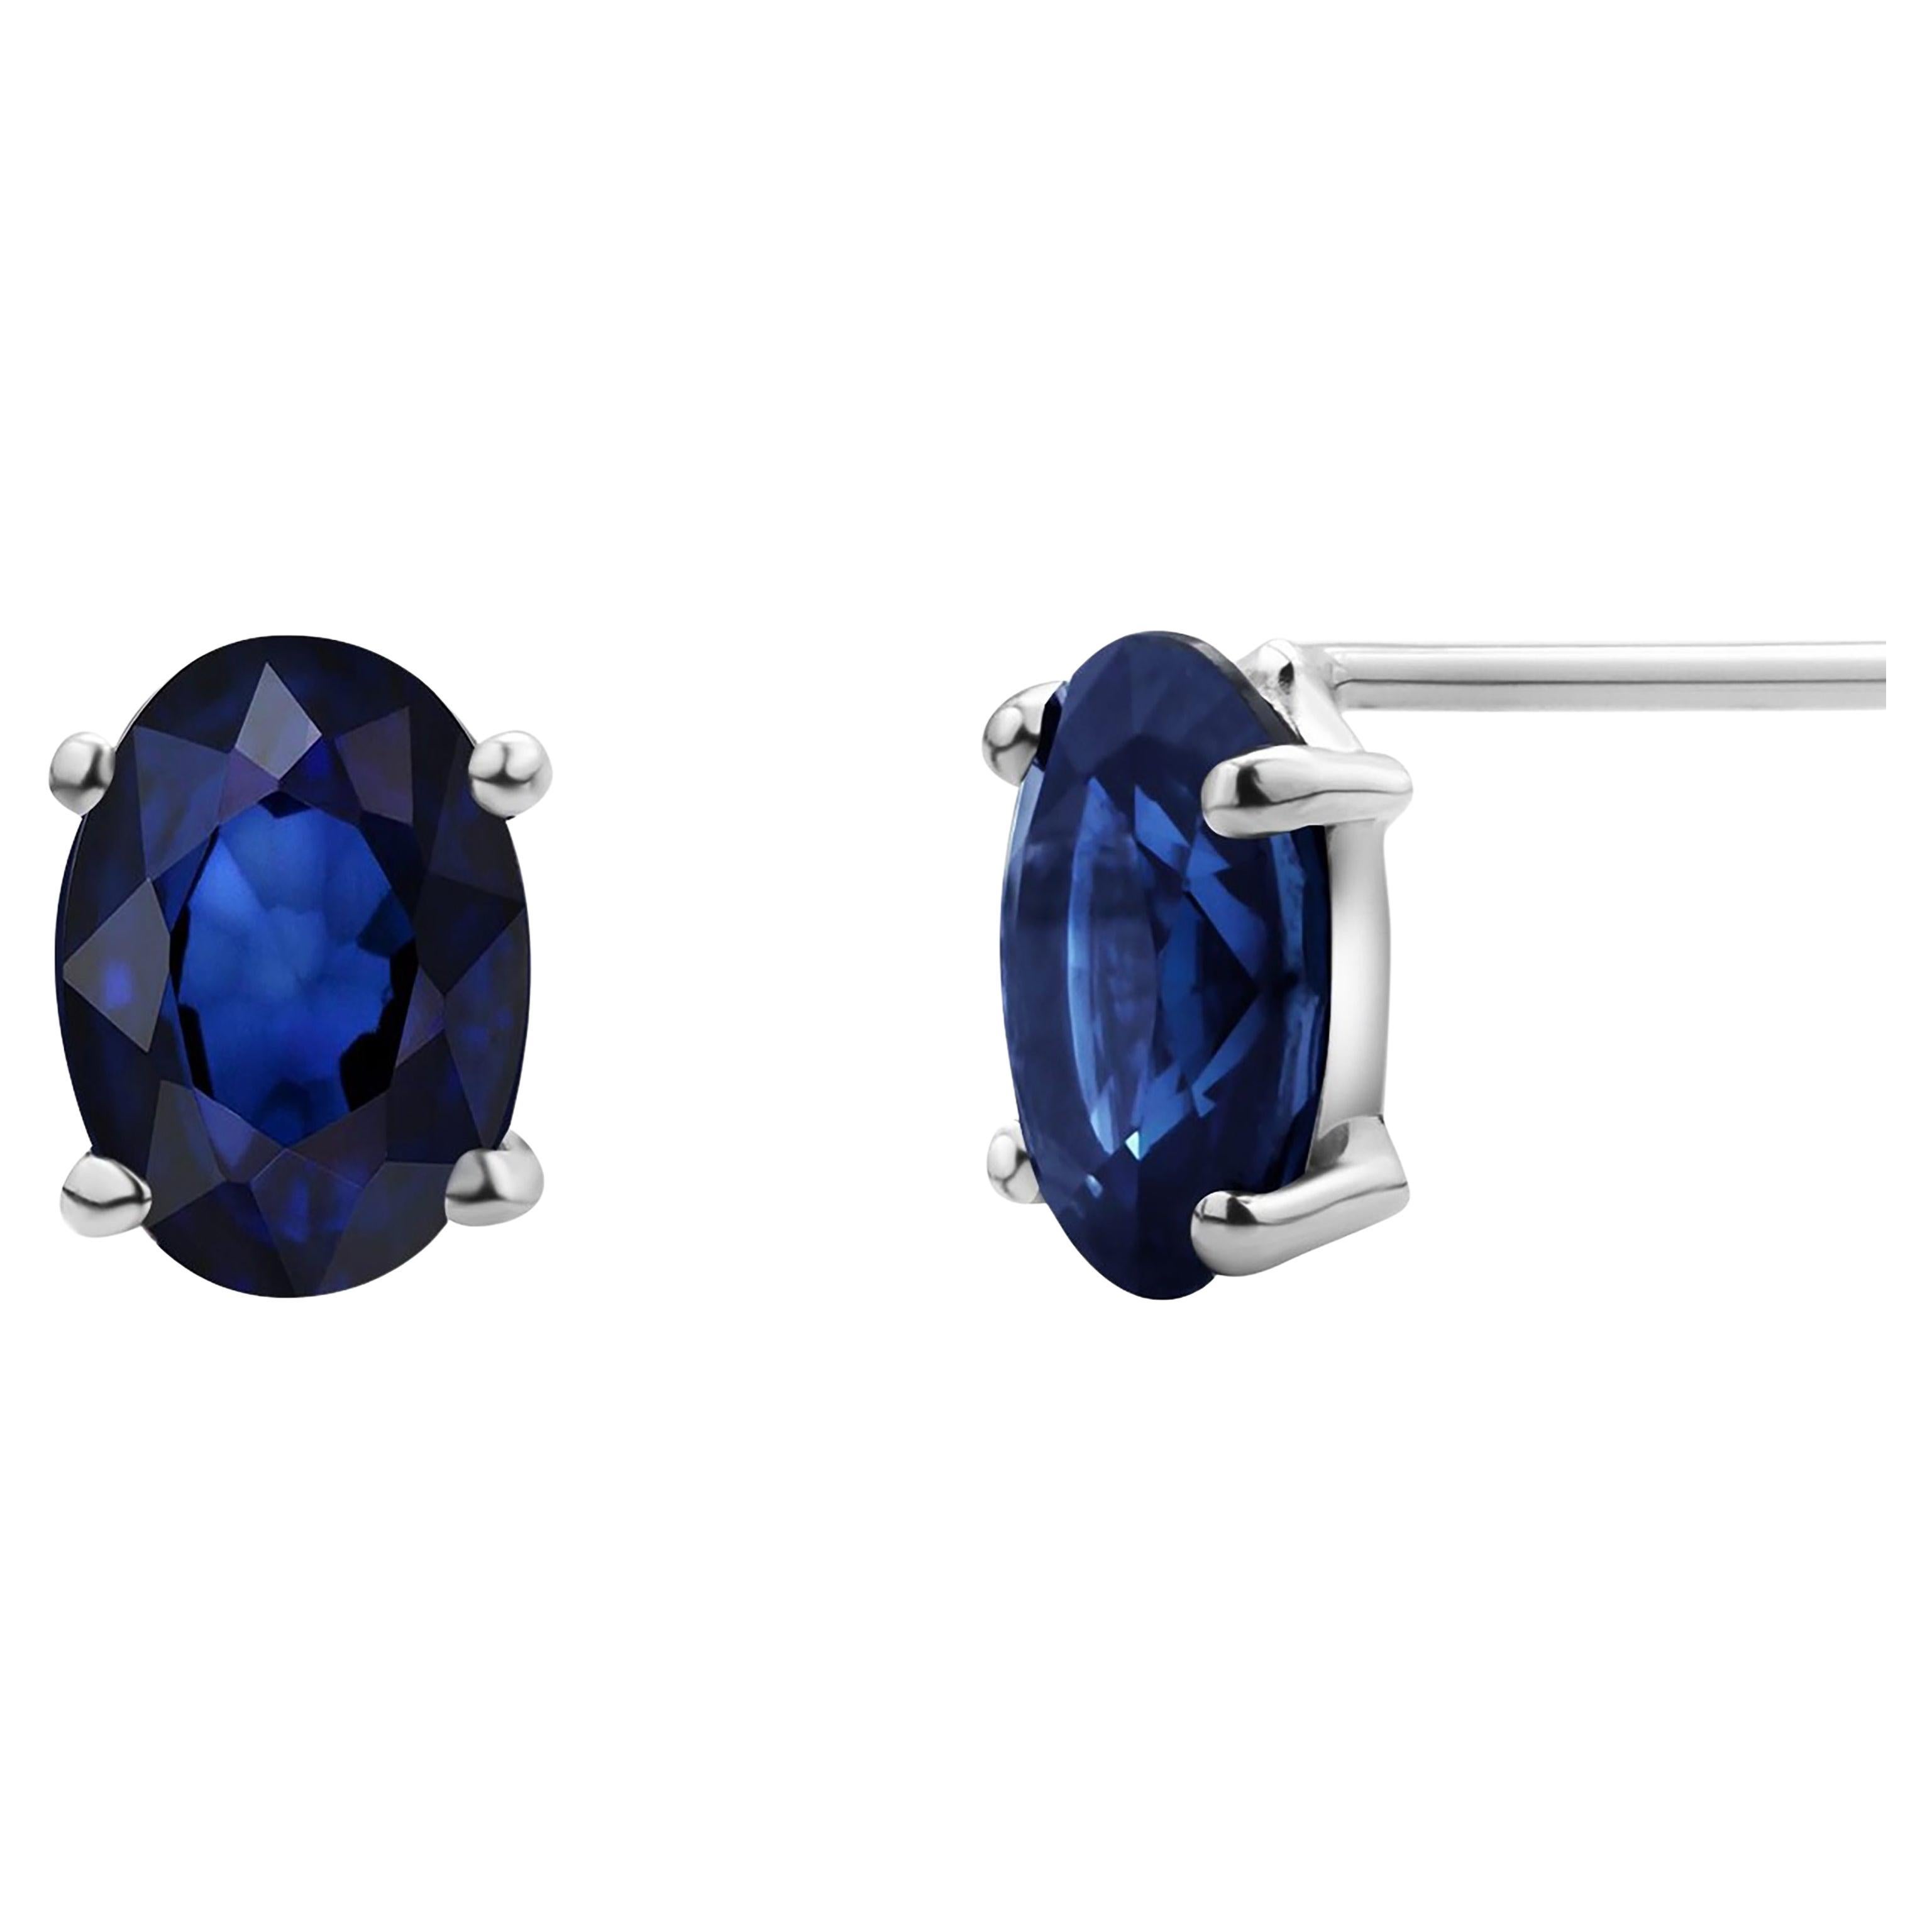 Matched Oval Sapphire 1.80 Carat White Gold 0.27 Inch Long Stud Earrings For Sale